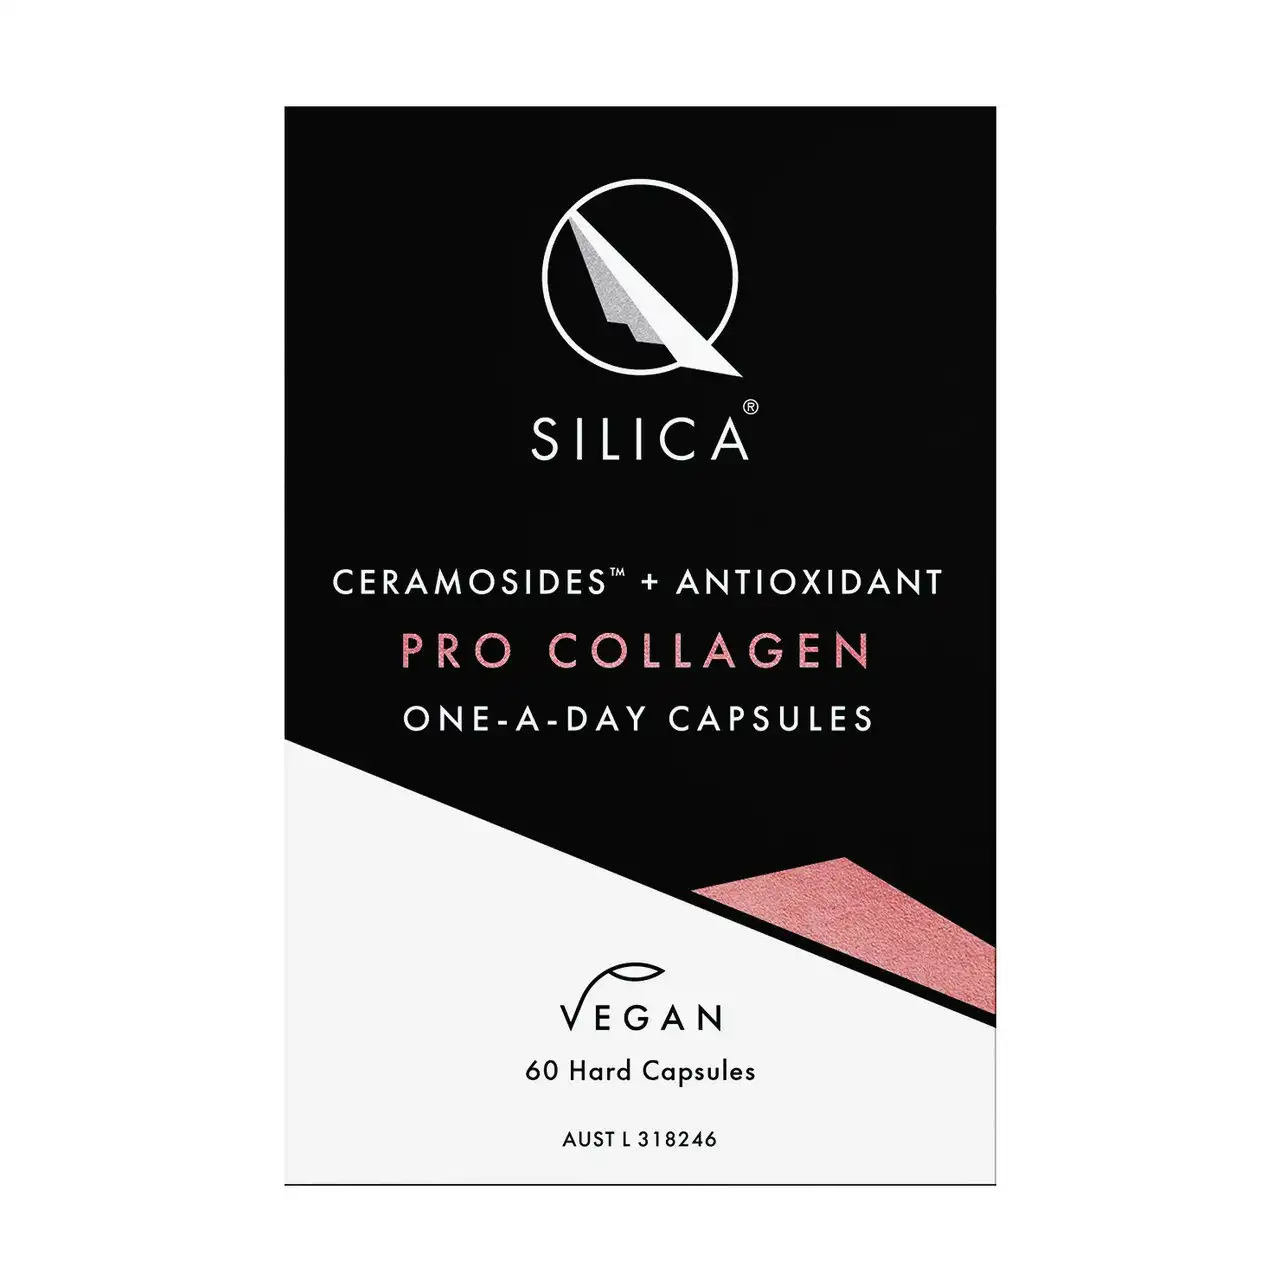 Q Silica Pro Collagen One-A-Day Capsules 60